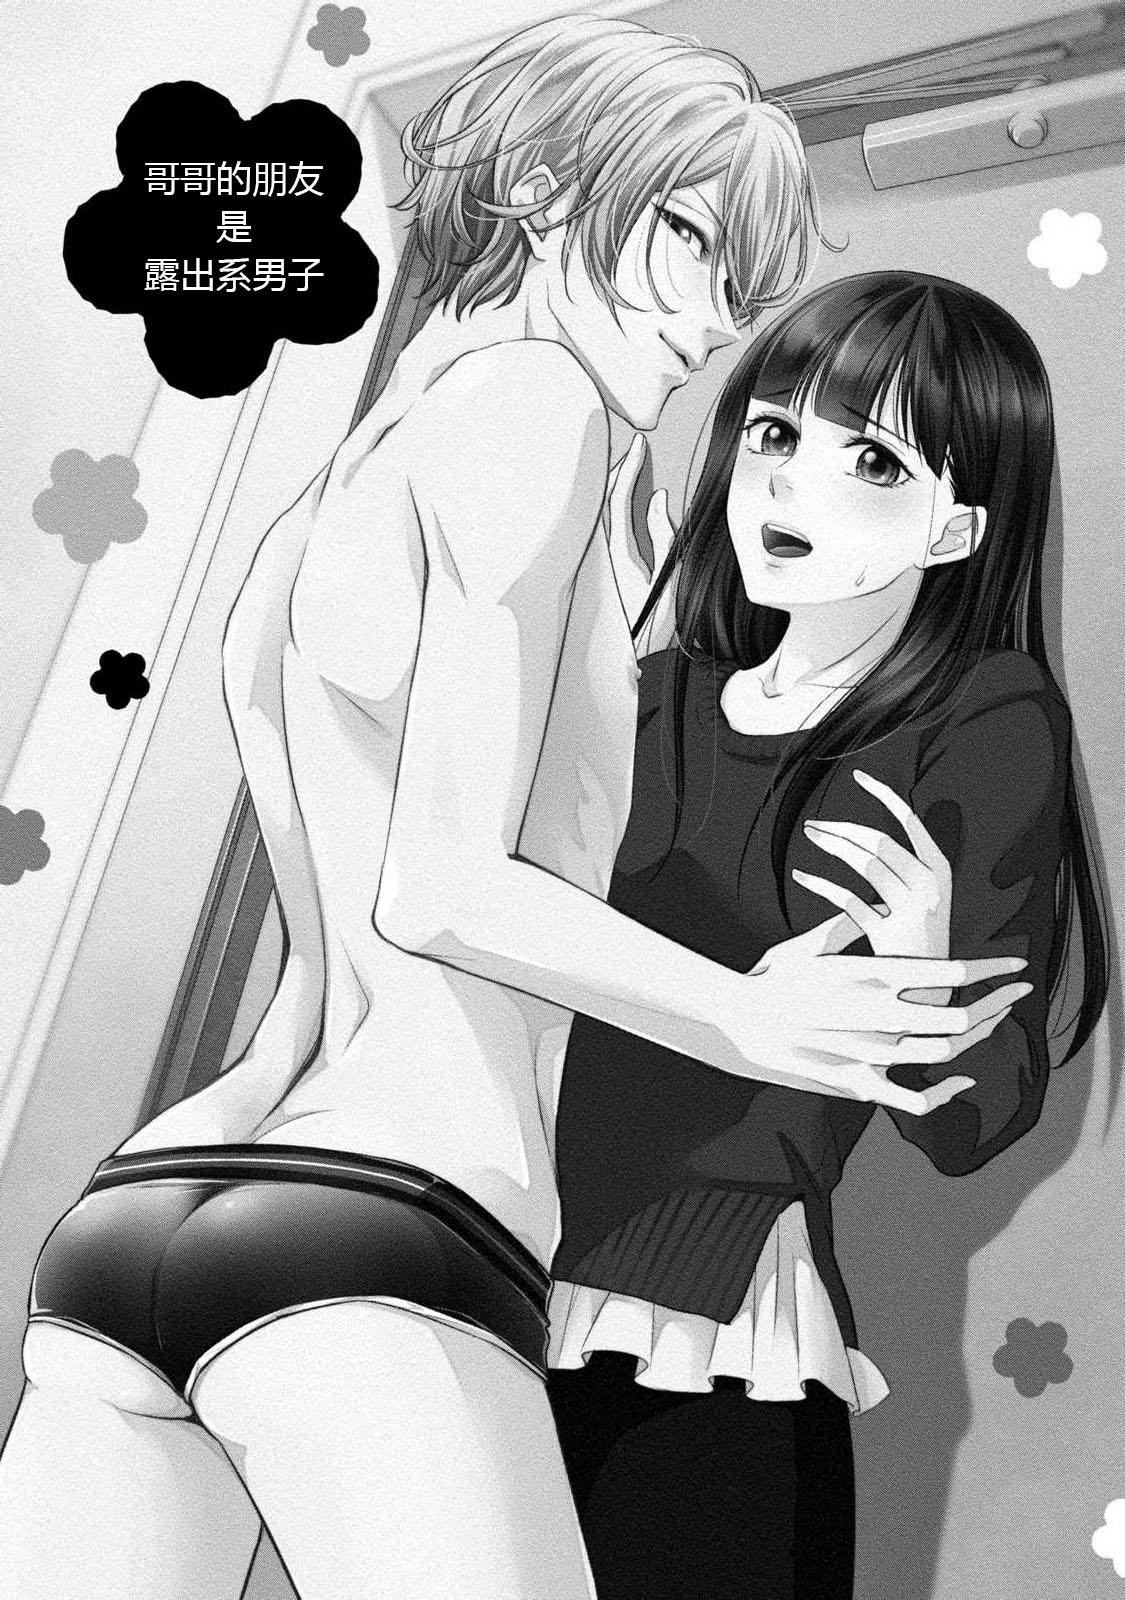 Storyline If my brother's friend was a male of exposure | 哥哥的朋友是露出系男子 Ano - Picture 2